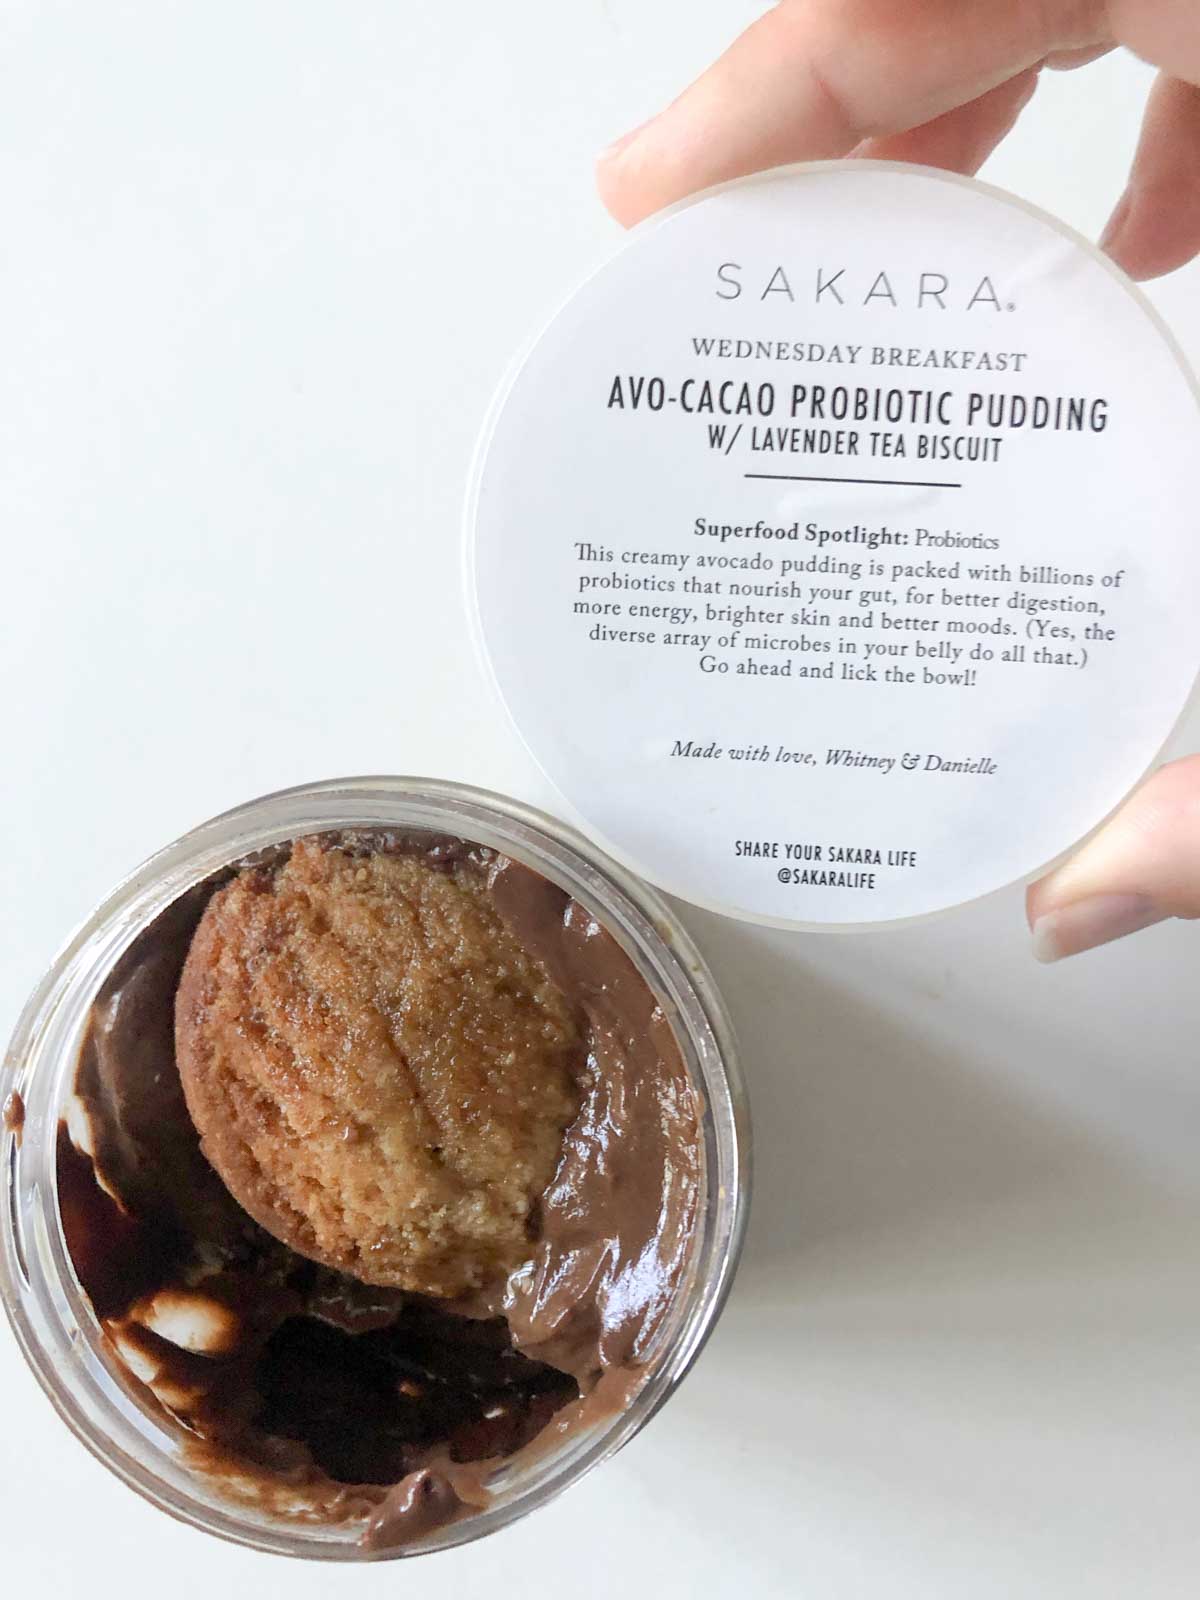 avo-cacao probiotic pudding with lavender tea biscuit from sakara delivery